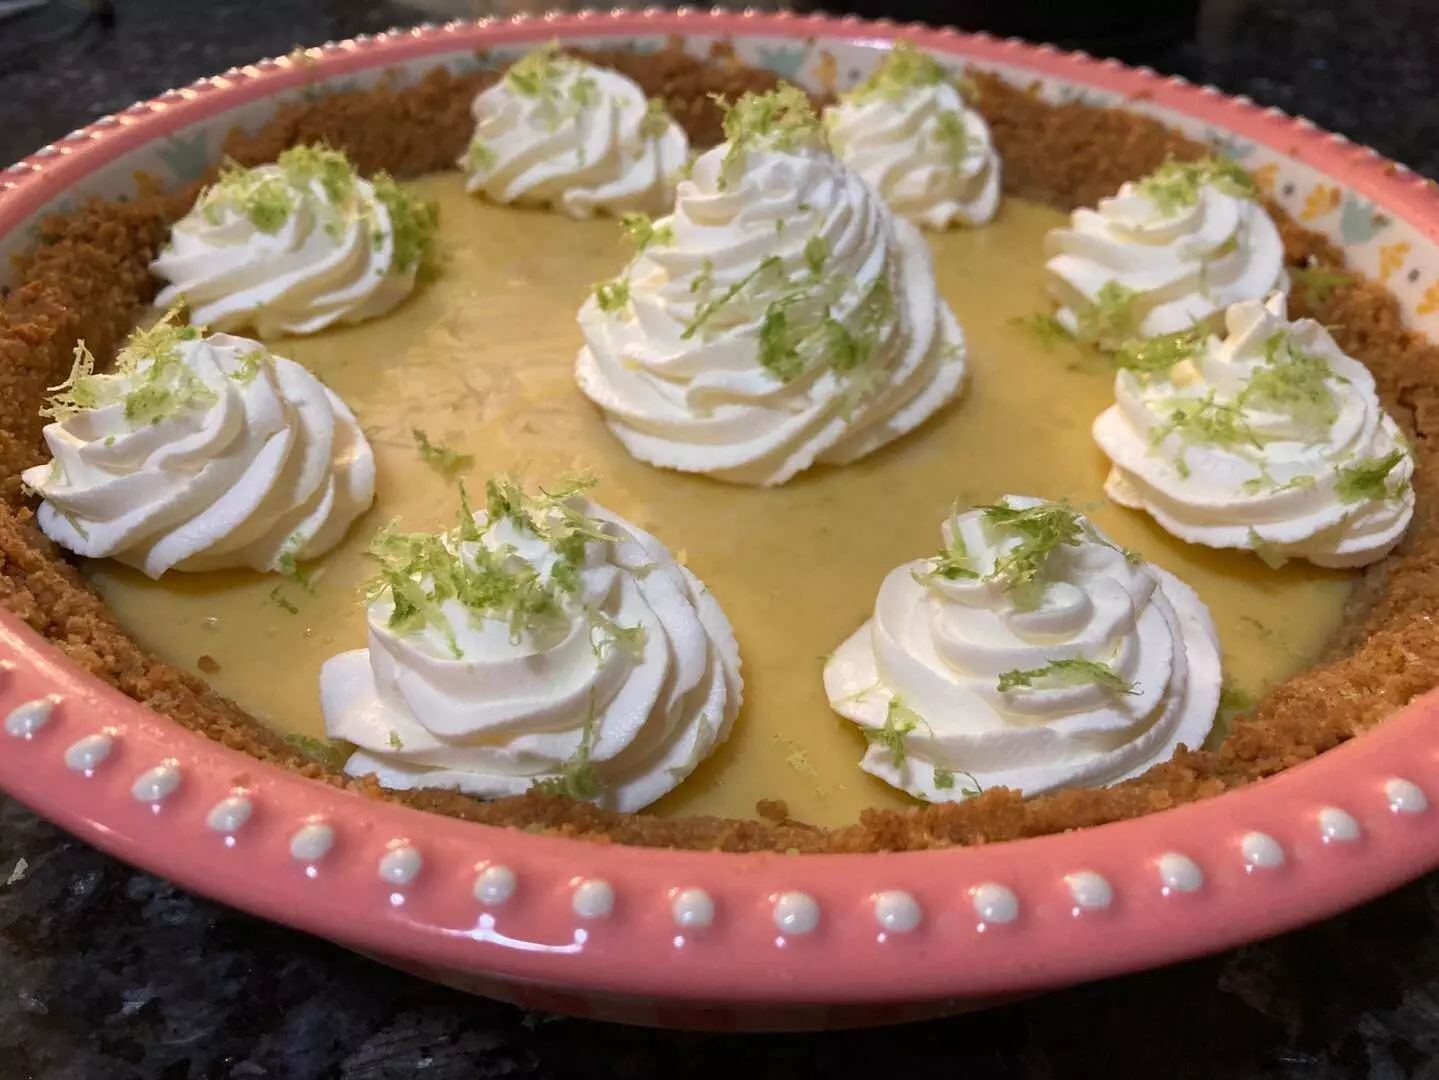 Easy Key Lime Pie (baked) from Out of the Box Baking.com